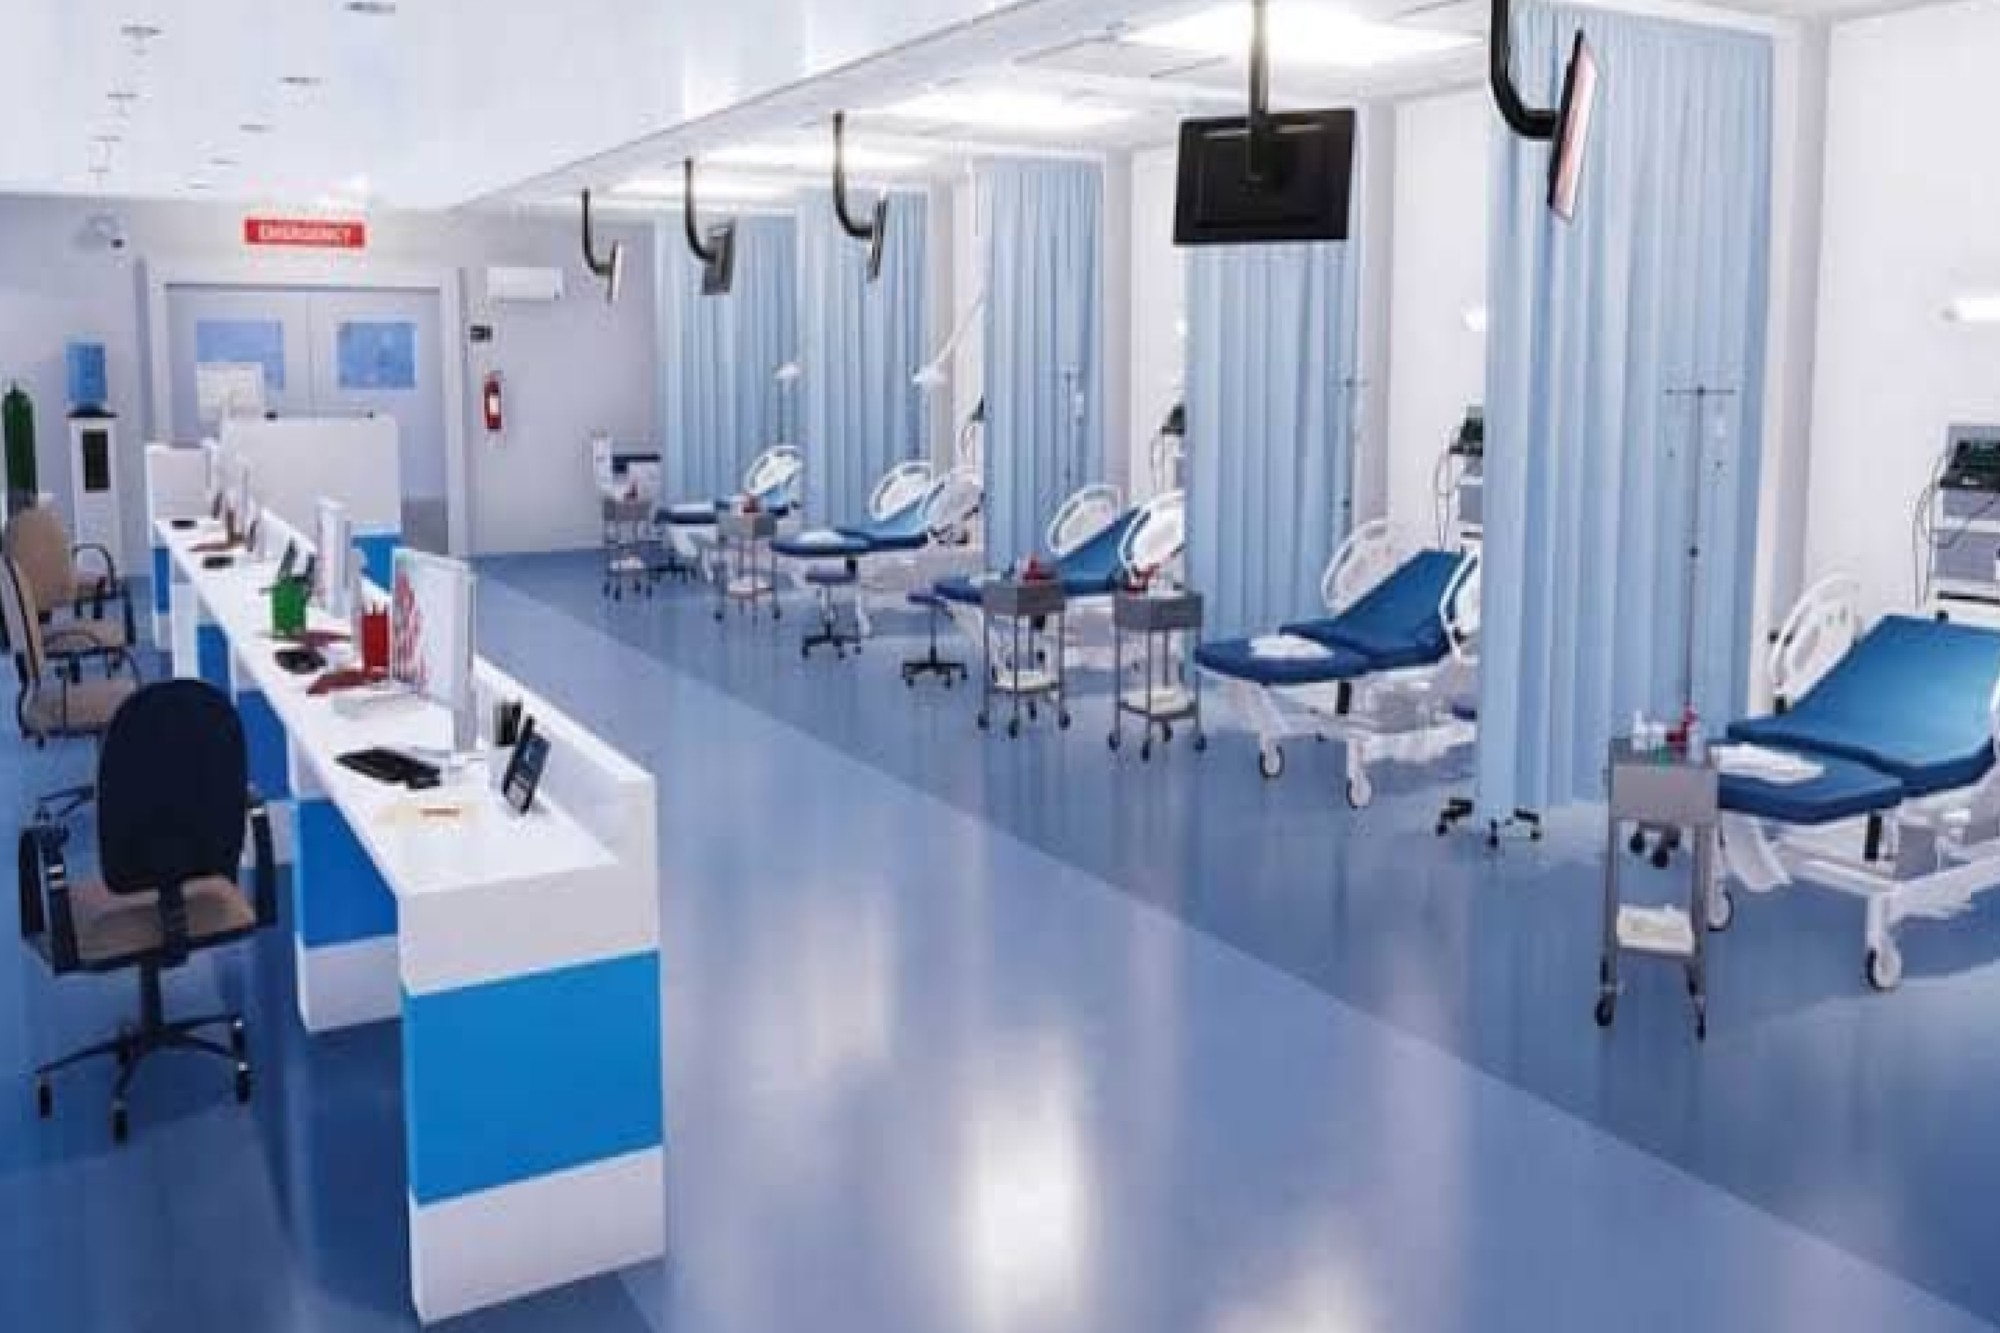 APICES Studio collabs with HOSMART for healthcare facility